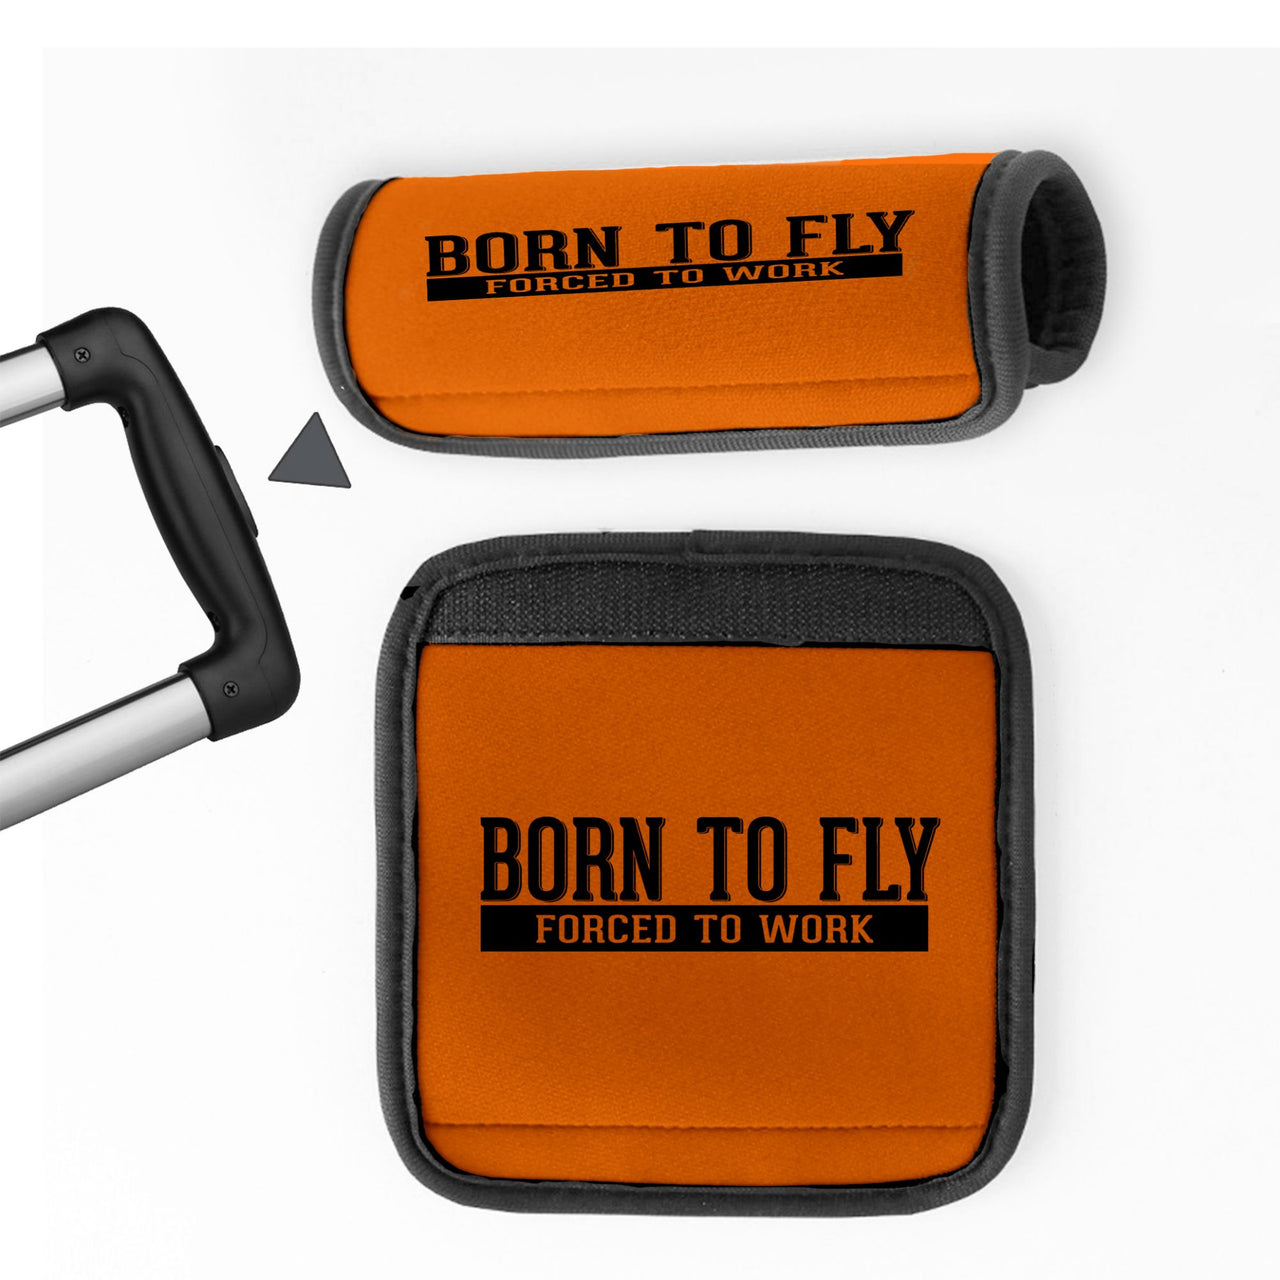 Born To Fly Forced To Work Designed Neoprene Luggage Handle Covers